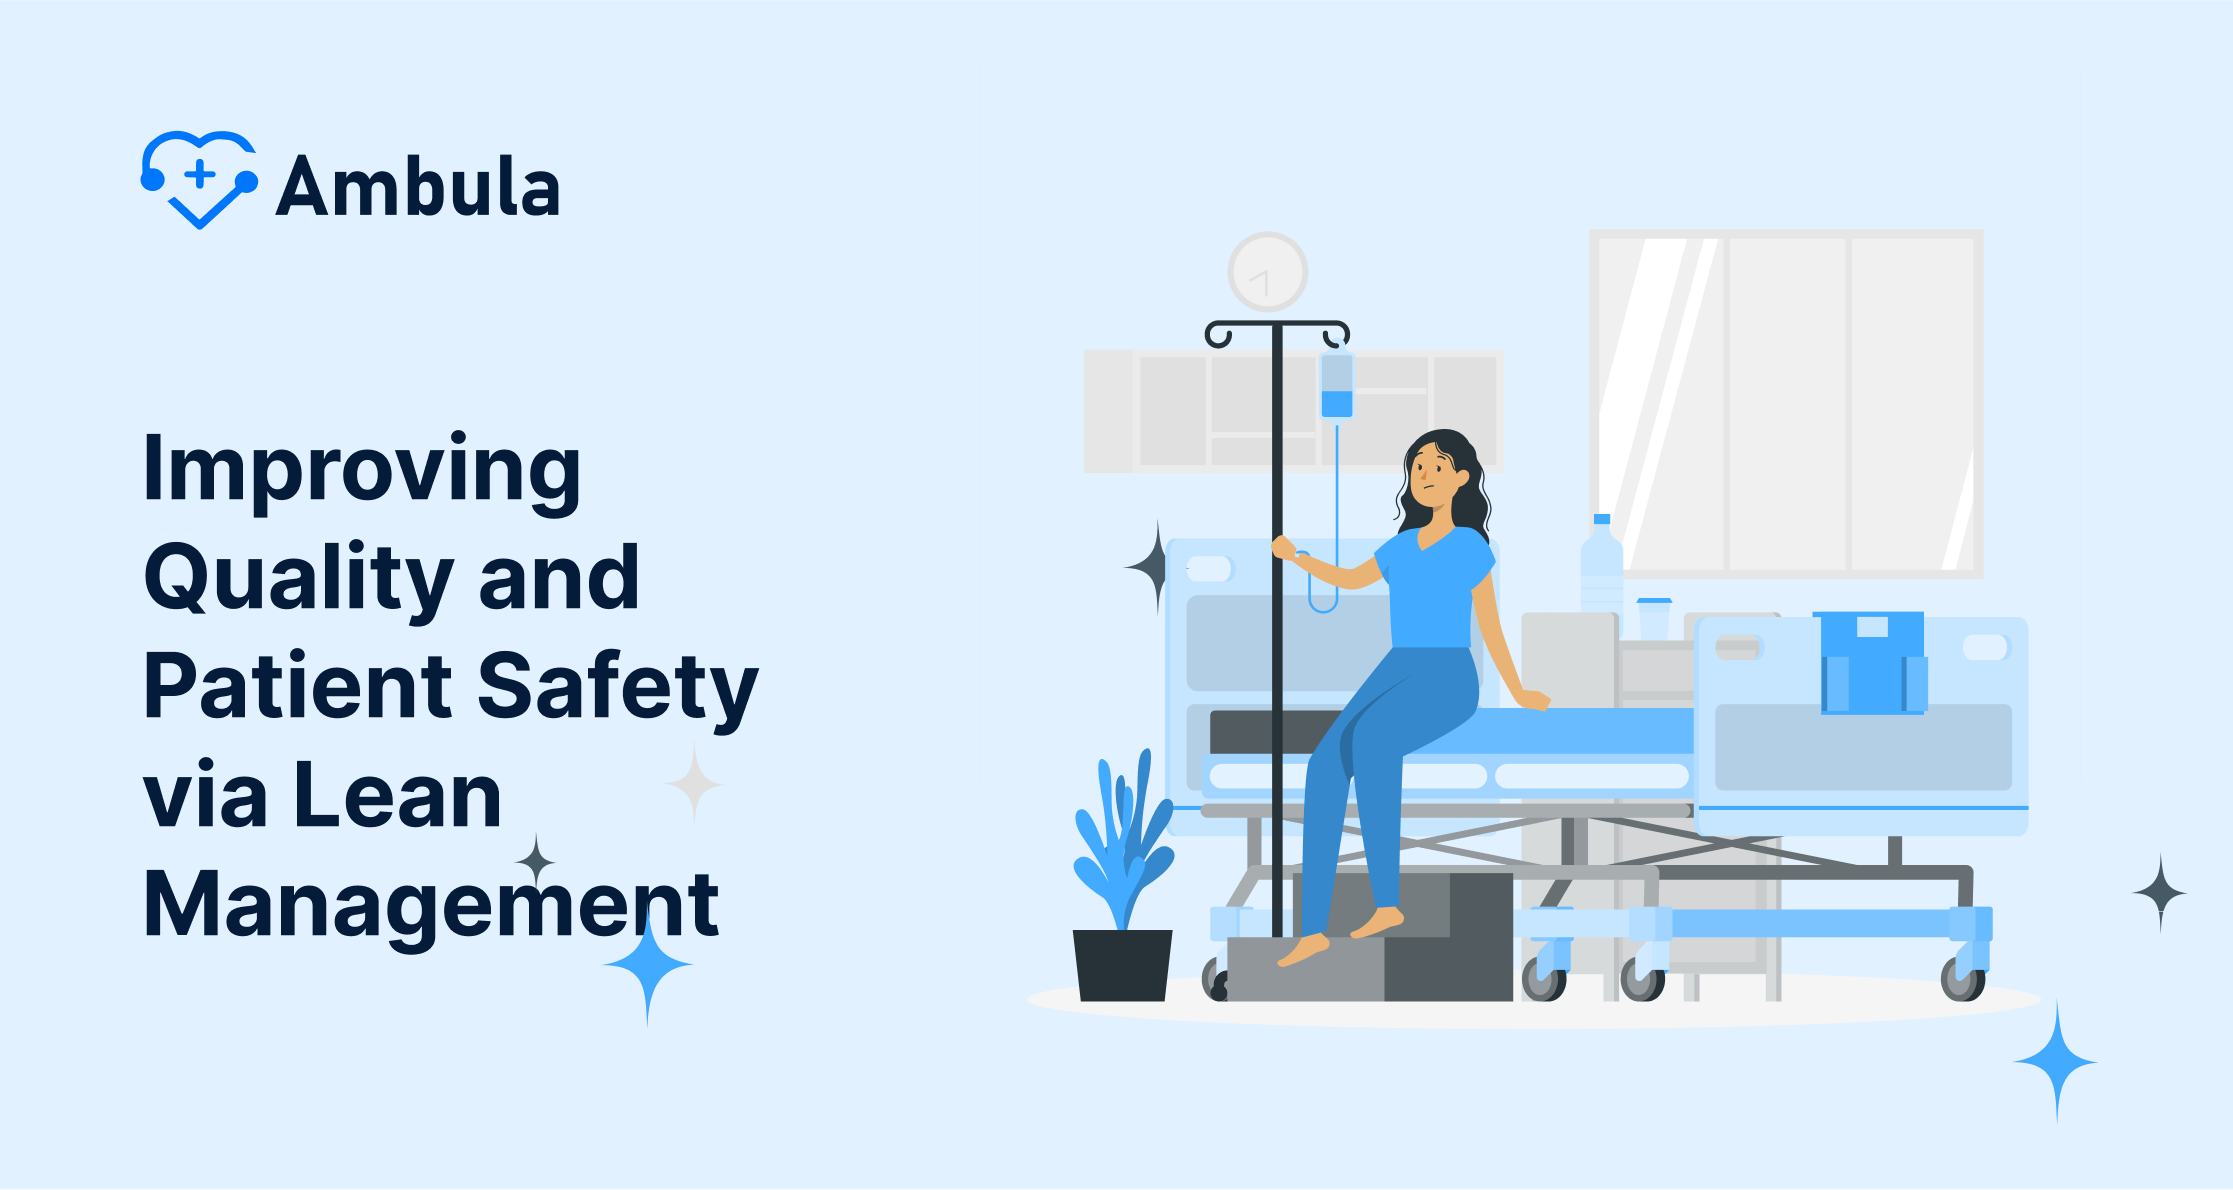 Improving Quality and Patient Safety via Lean Management